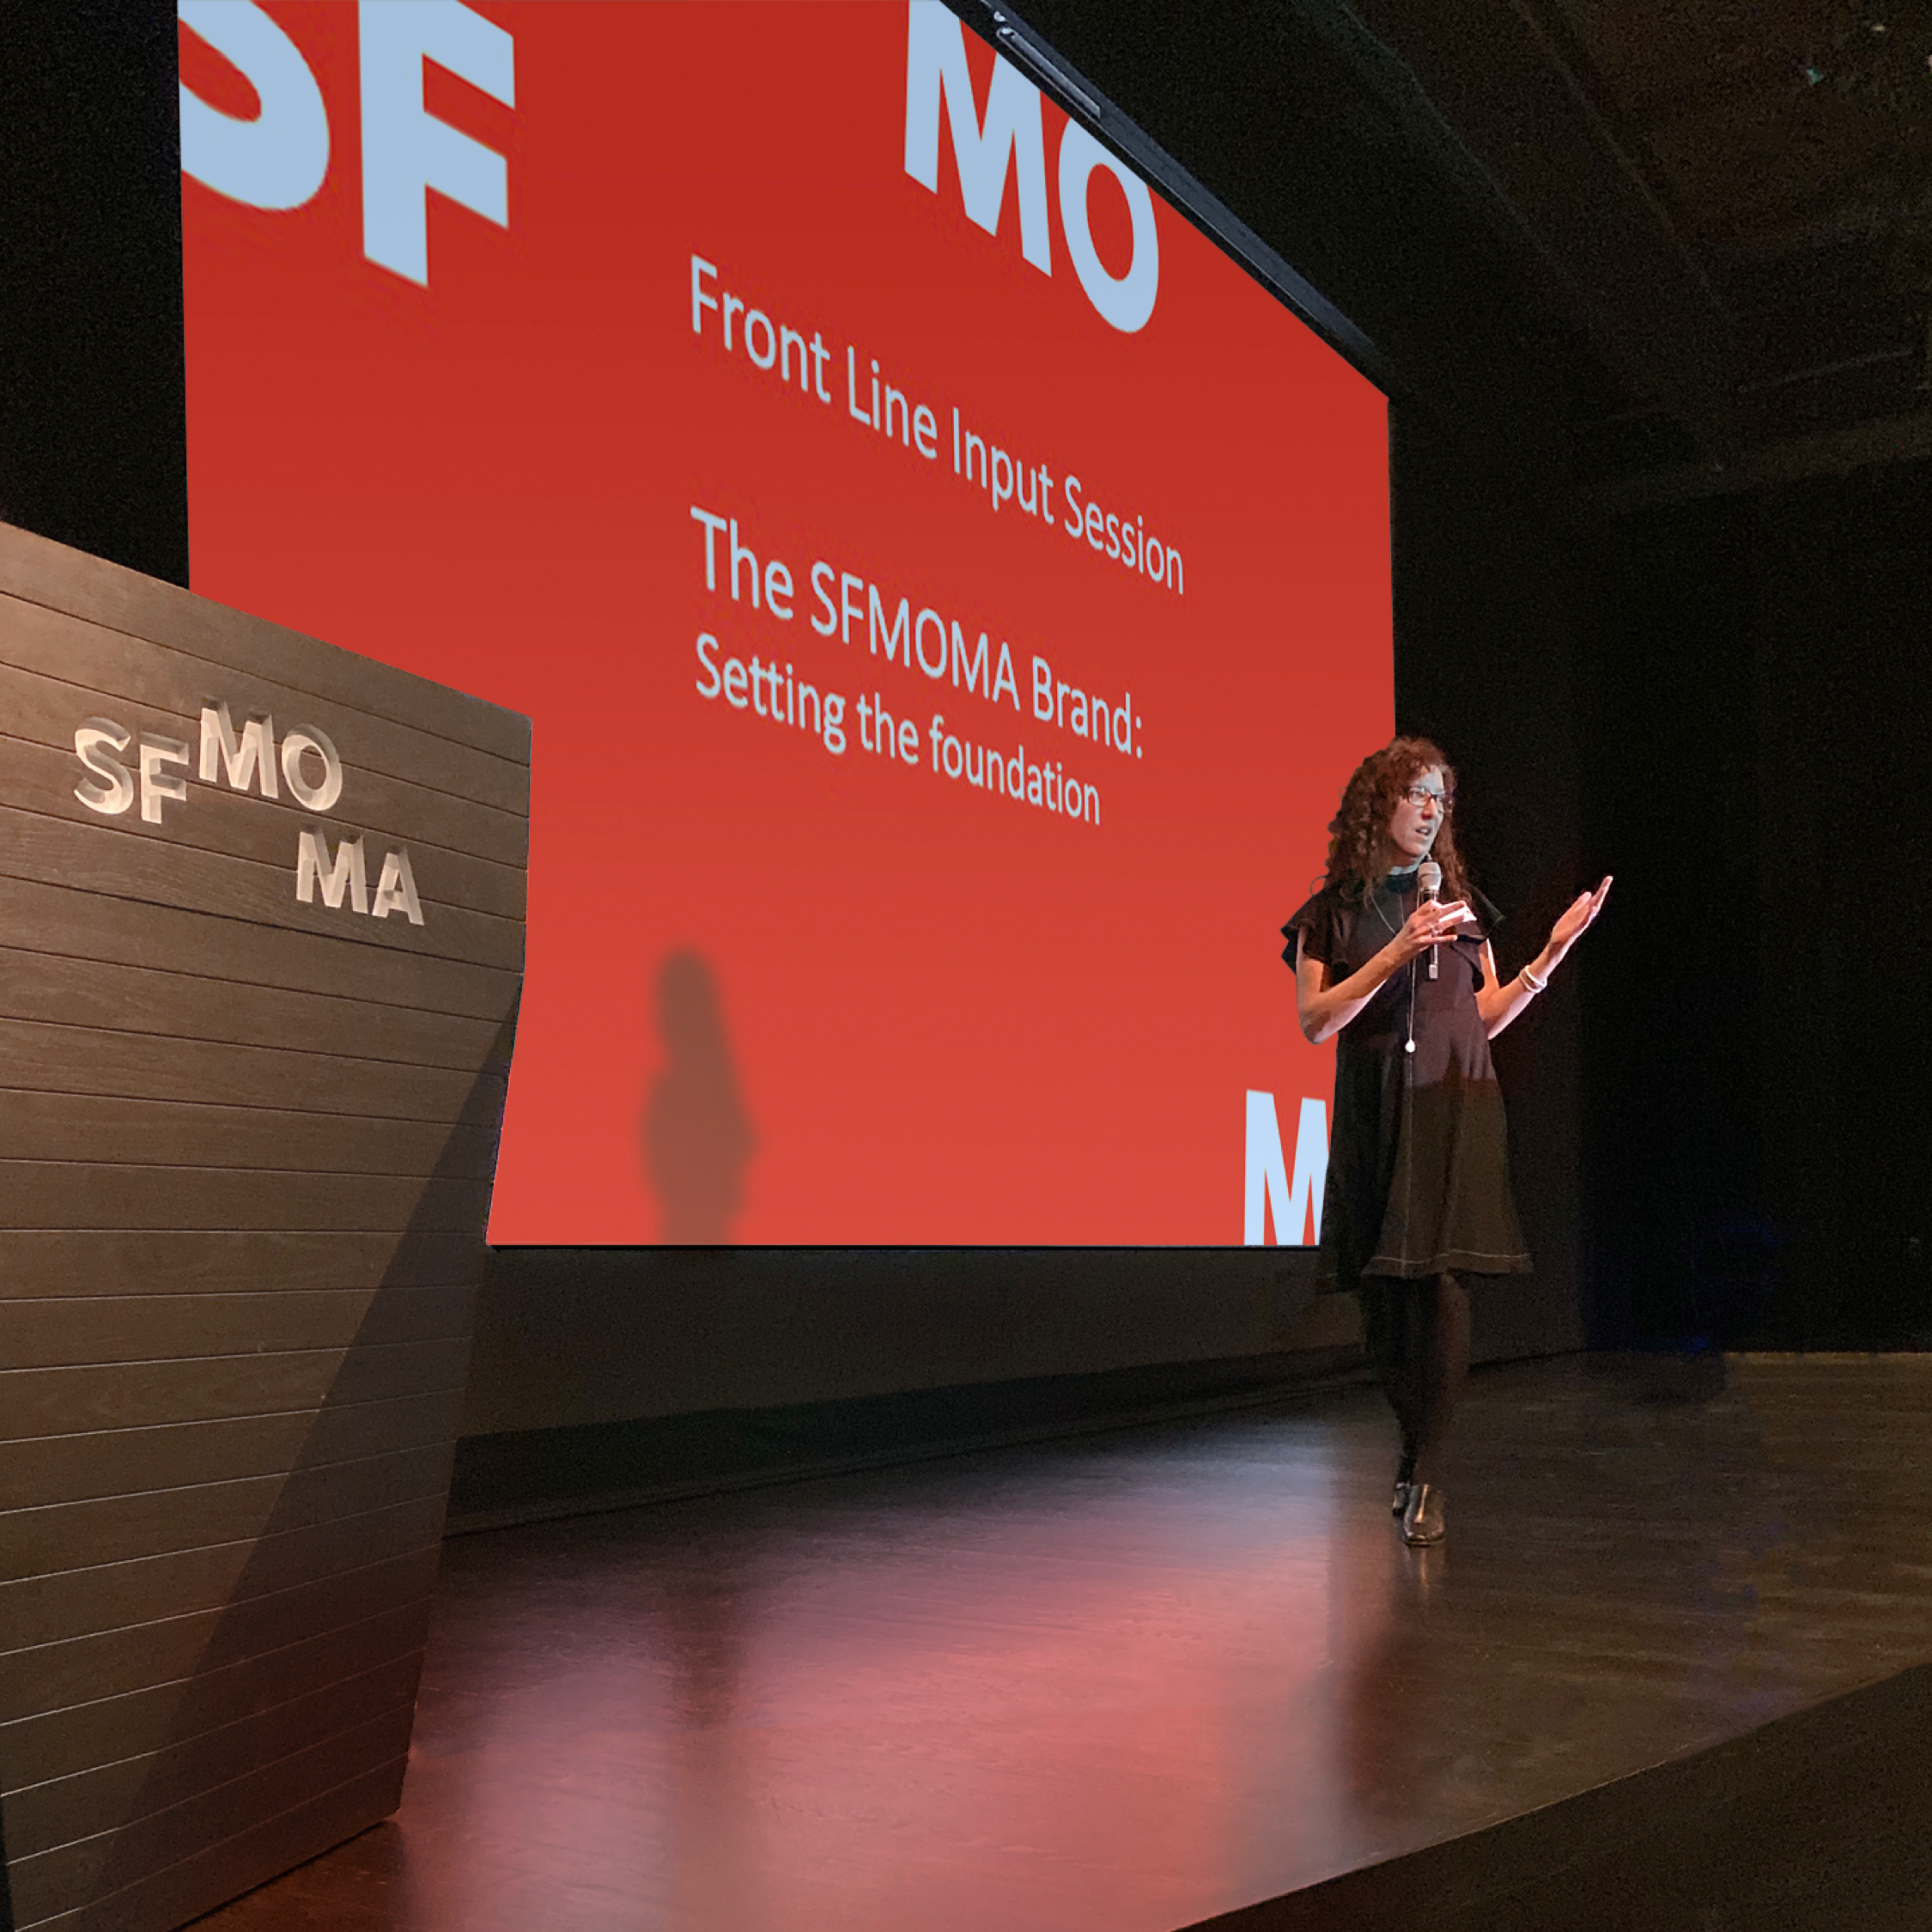 Shannon leading a brand workshop at SFMOMA